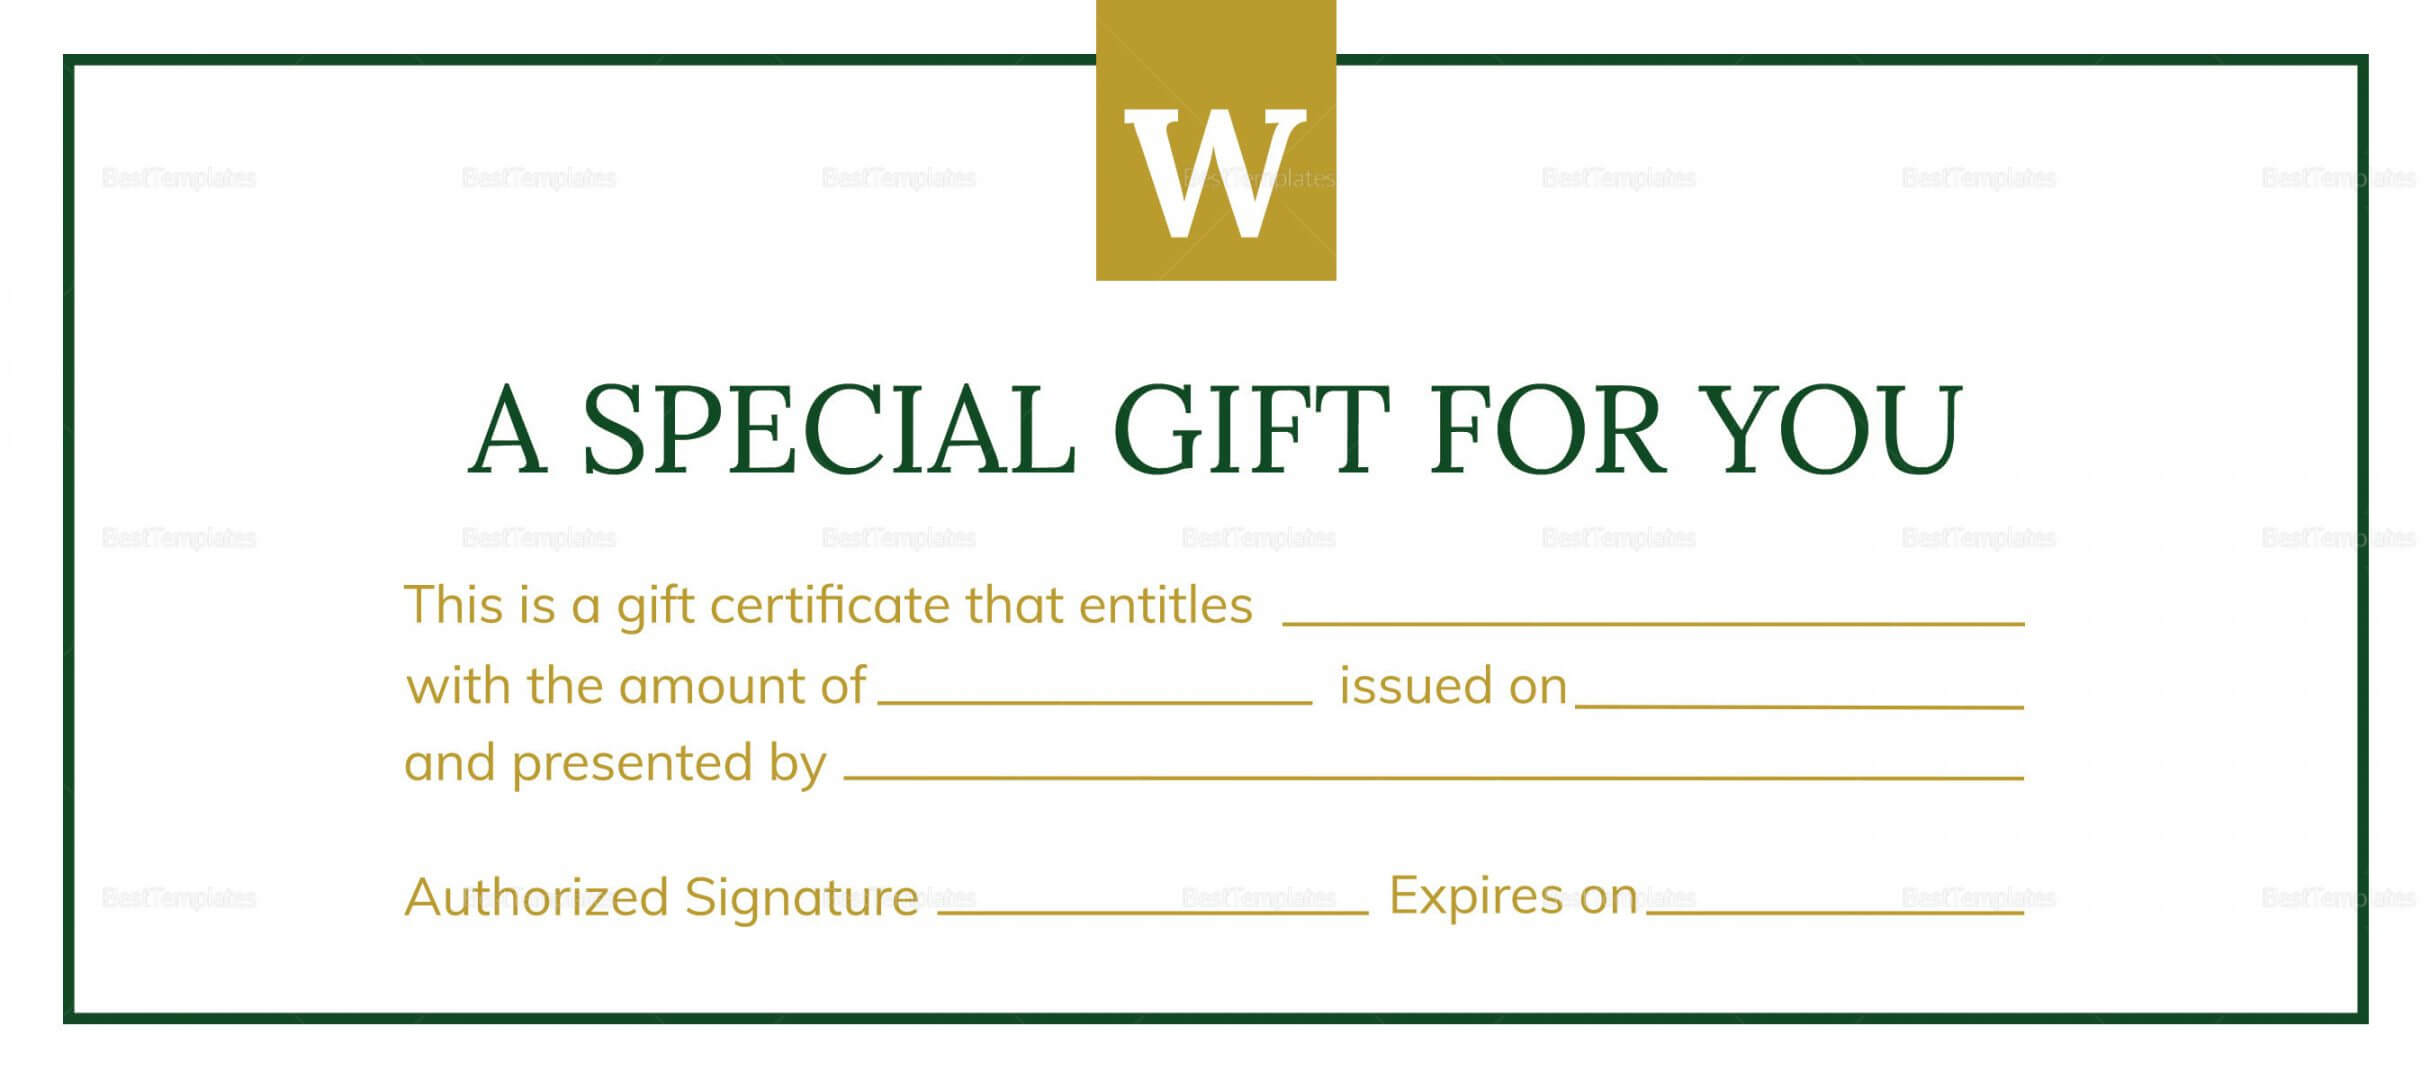 Hotel Gift Certificate Template Throughout This Certificate Entitles The Bearer Template